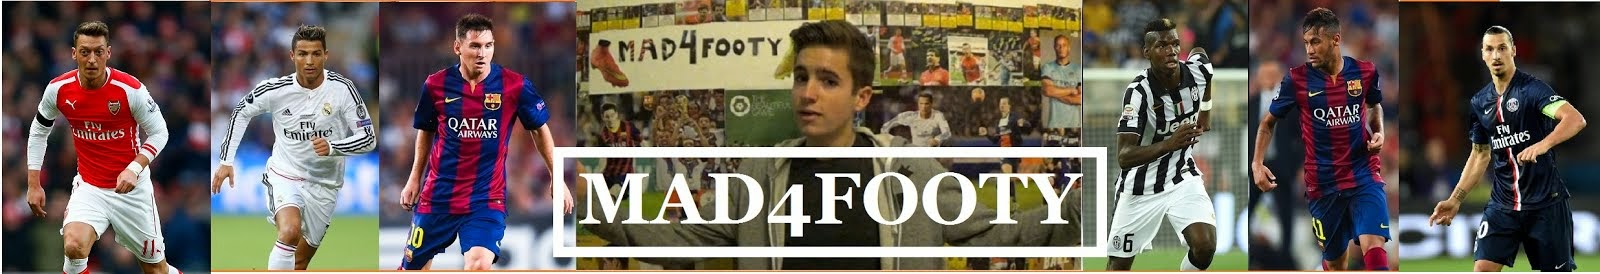 MAD4FOOTY